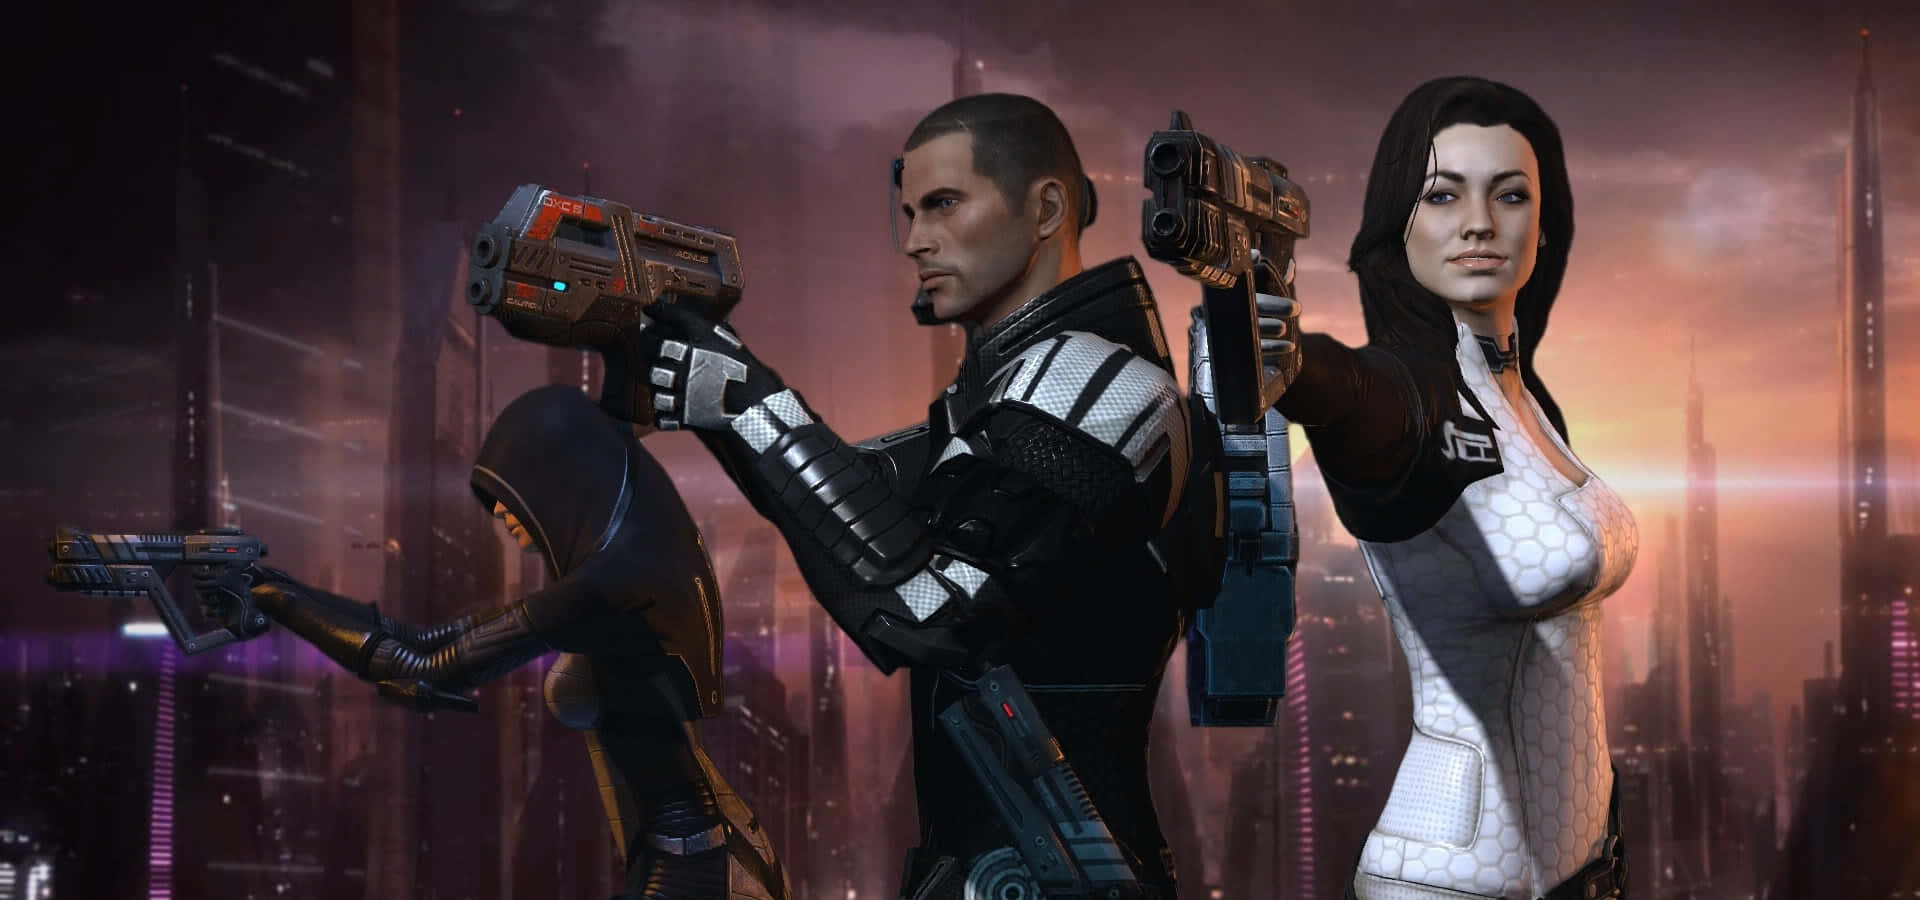 A team of Mass Effect characters ready for action Wallpaper